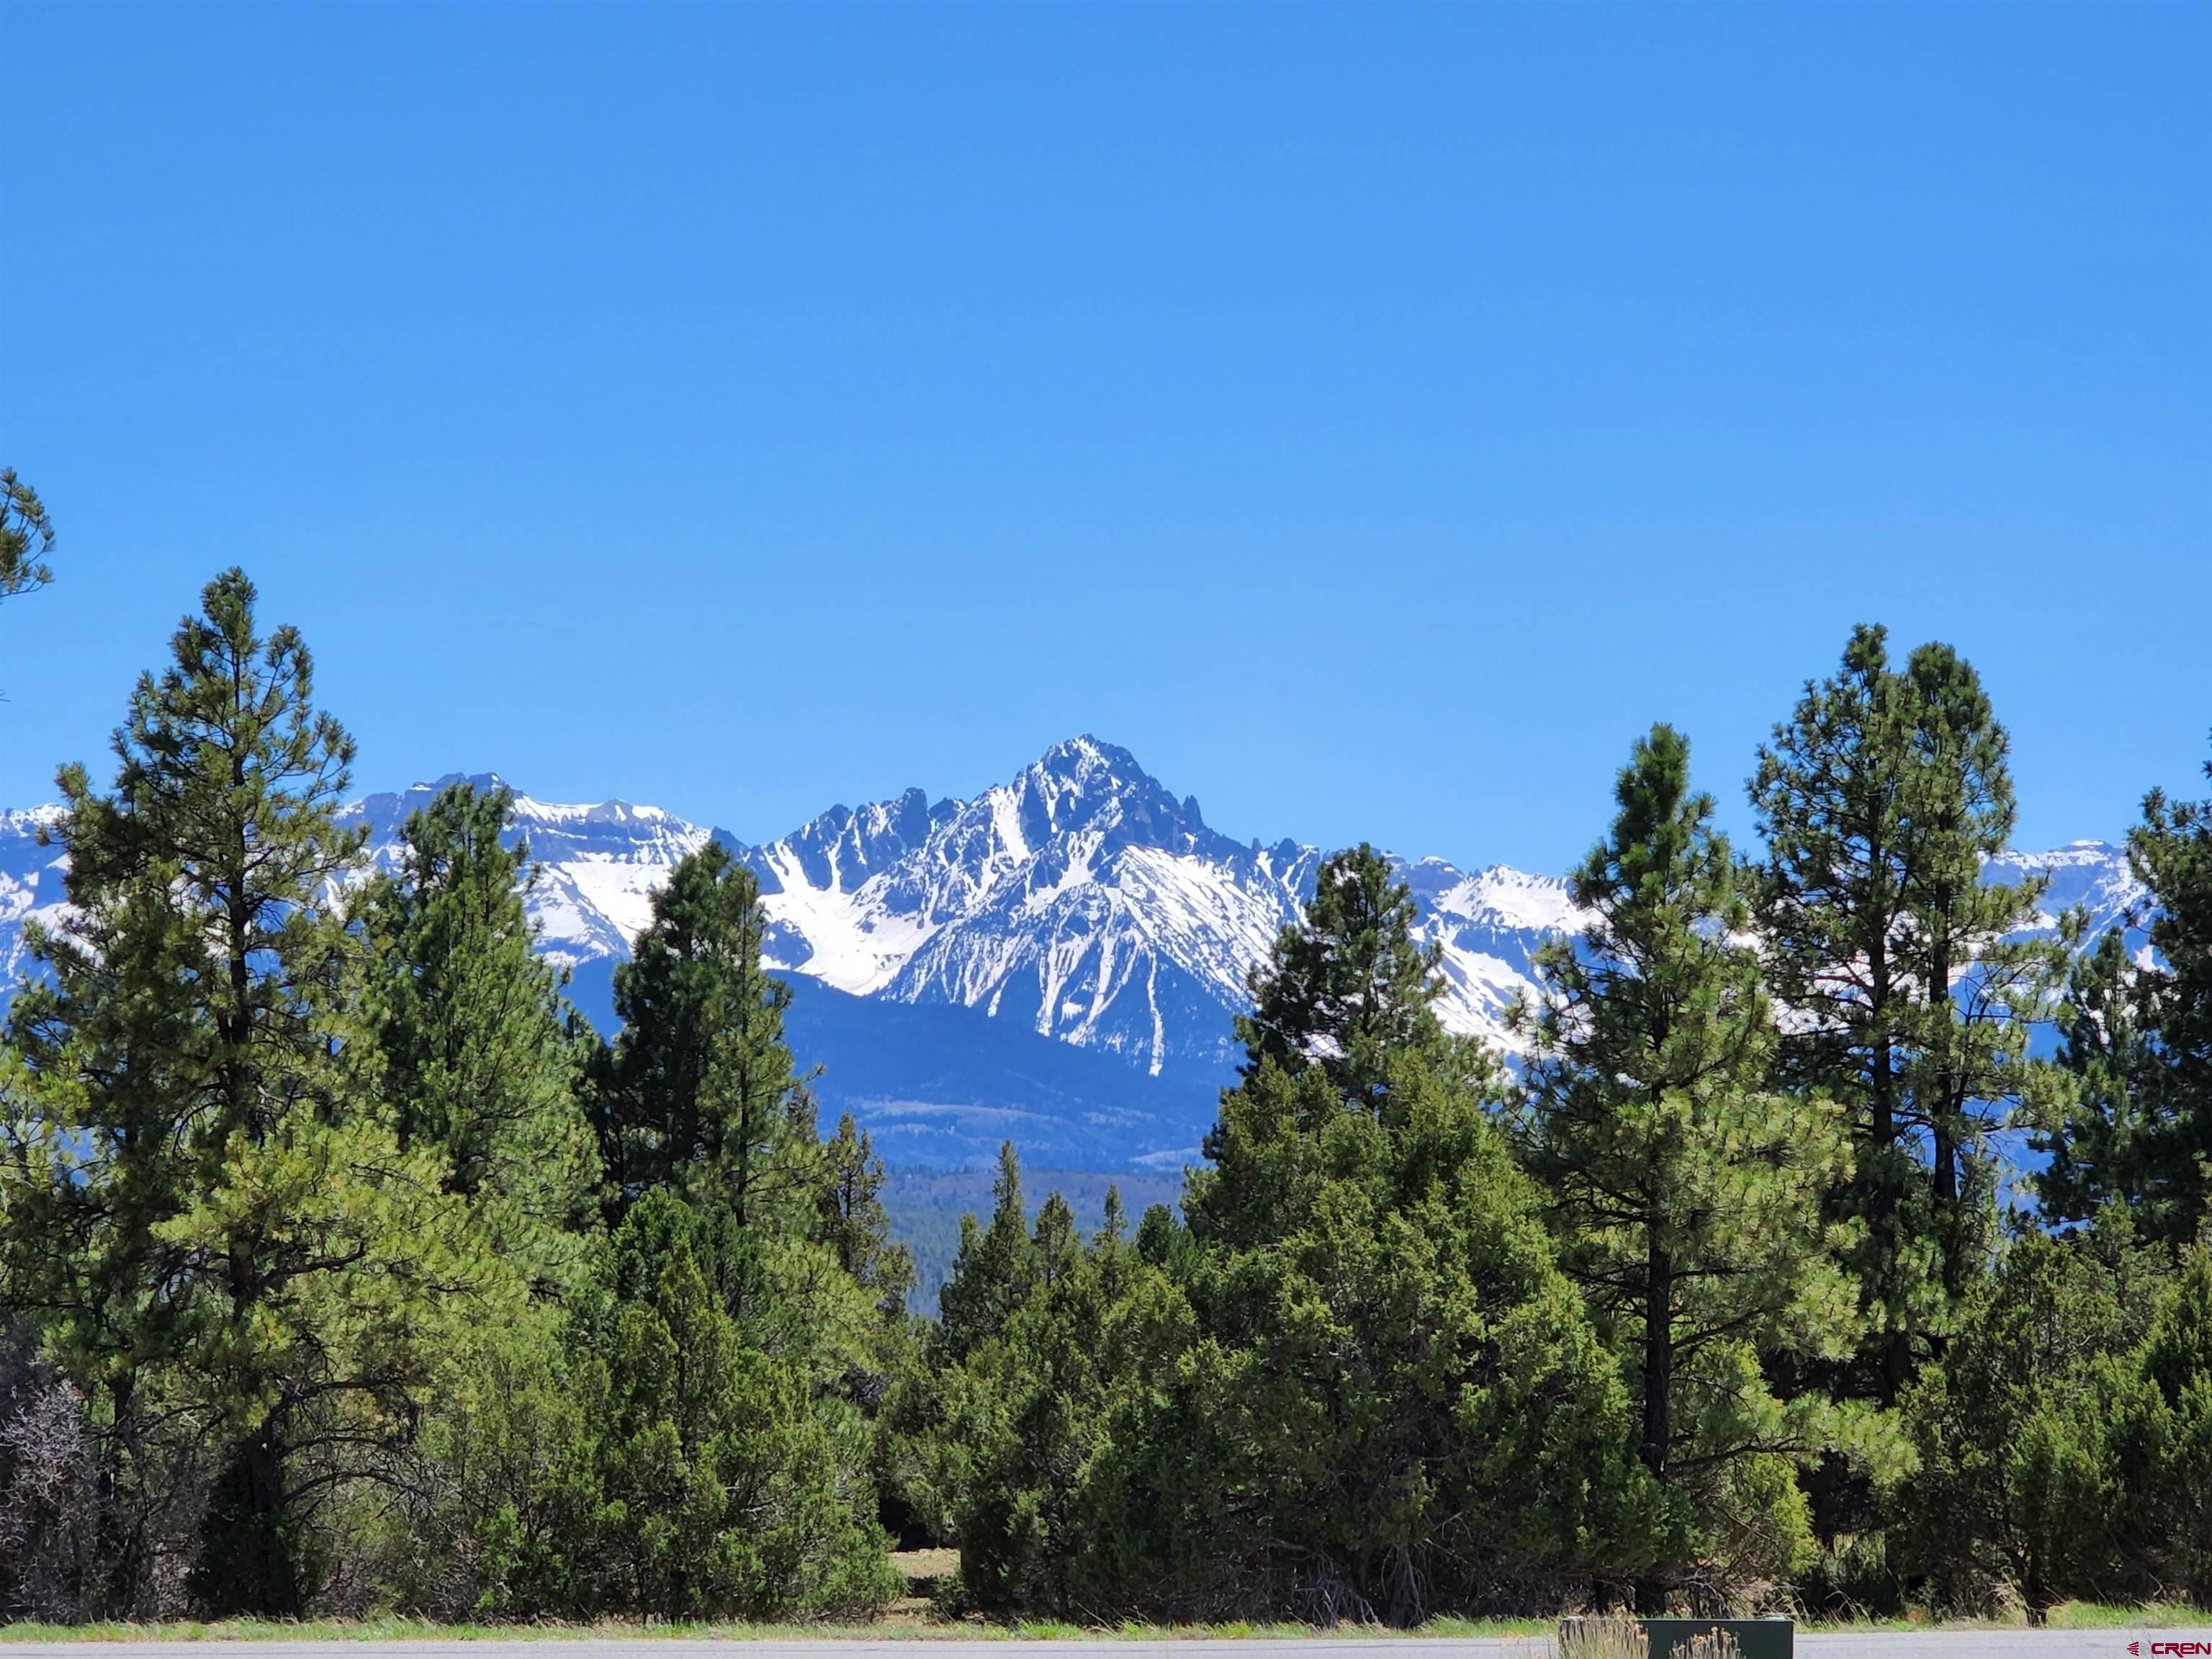 This property has the option for a custom-built residential home with spectacular views of the Divide Ranch golf course and the San Juans & Cimarrons mountains in one of Ridgway's most sought after neighborhood of Log Hill! This commercially zoned parcel captures a "direct shot" of Mt. Sneffels. Adjacent to a vast amount of open space, you can create your commercial venture, or a spectacular residential home with the approval of Ouray County Planning & Zoning on this amazing parcel. The possibilities are endless: wedding destination, lodging, brewery, distillery, or restaurant  Live, work and play!   This property is minutes from downtown Ridgway, Ouray, Telluride, Montrose airport, skiing, festivals, climbing, jeeping, hiking, boating and flyfishing.  So many outdoor adventures at your fingertips.